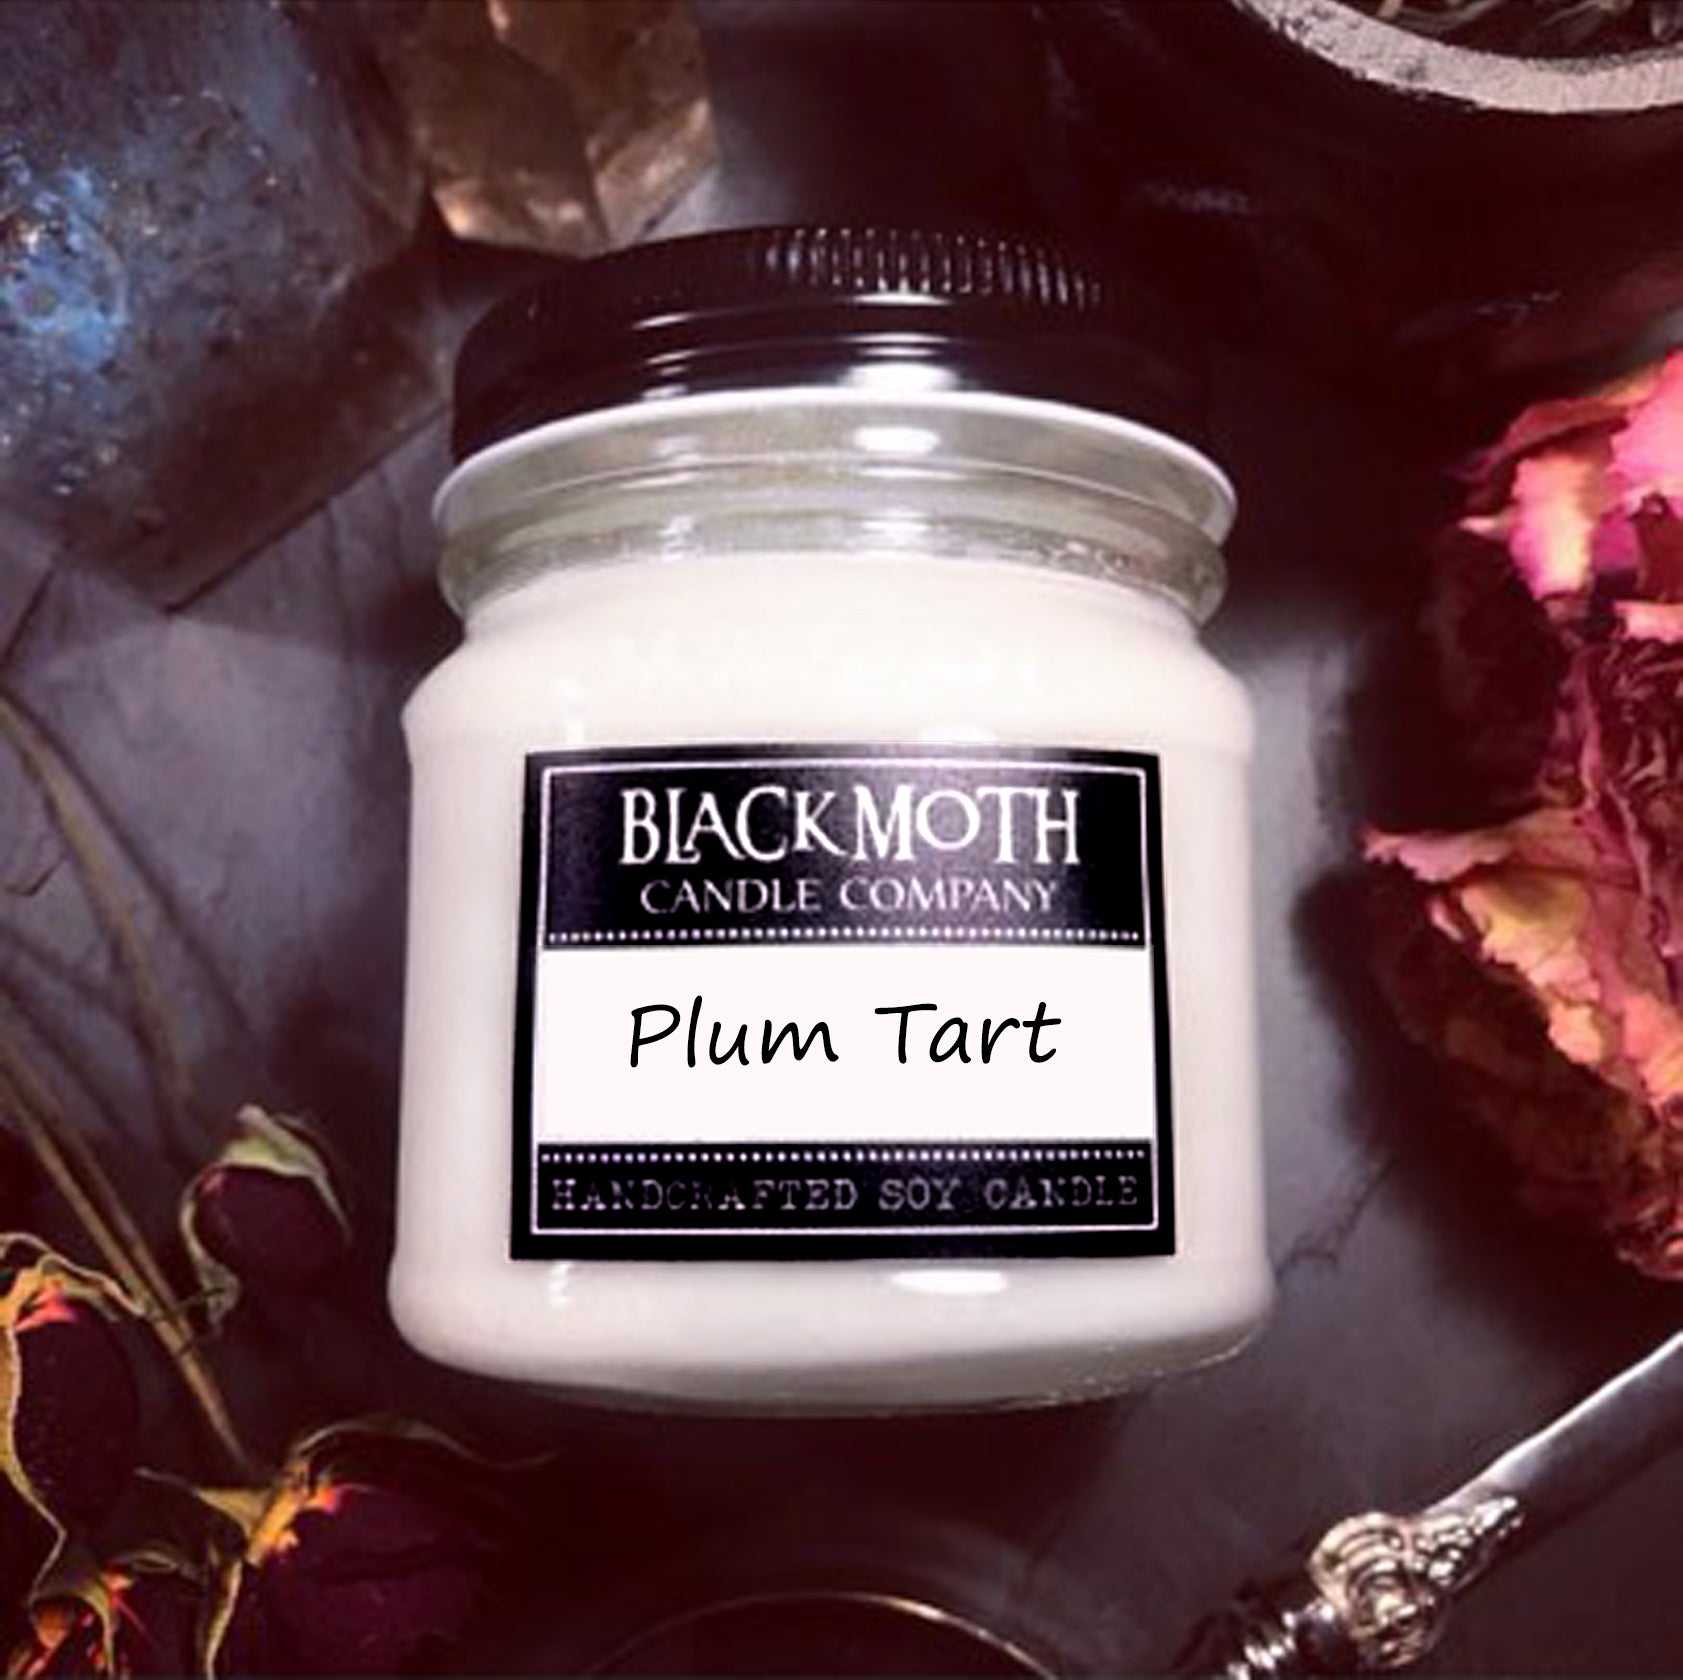 8 oz Plum Tart Scented Soy Candle in Mason Jar